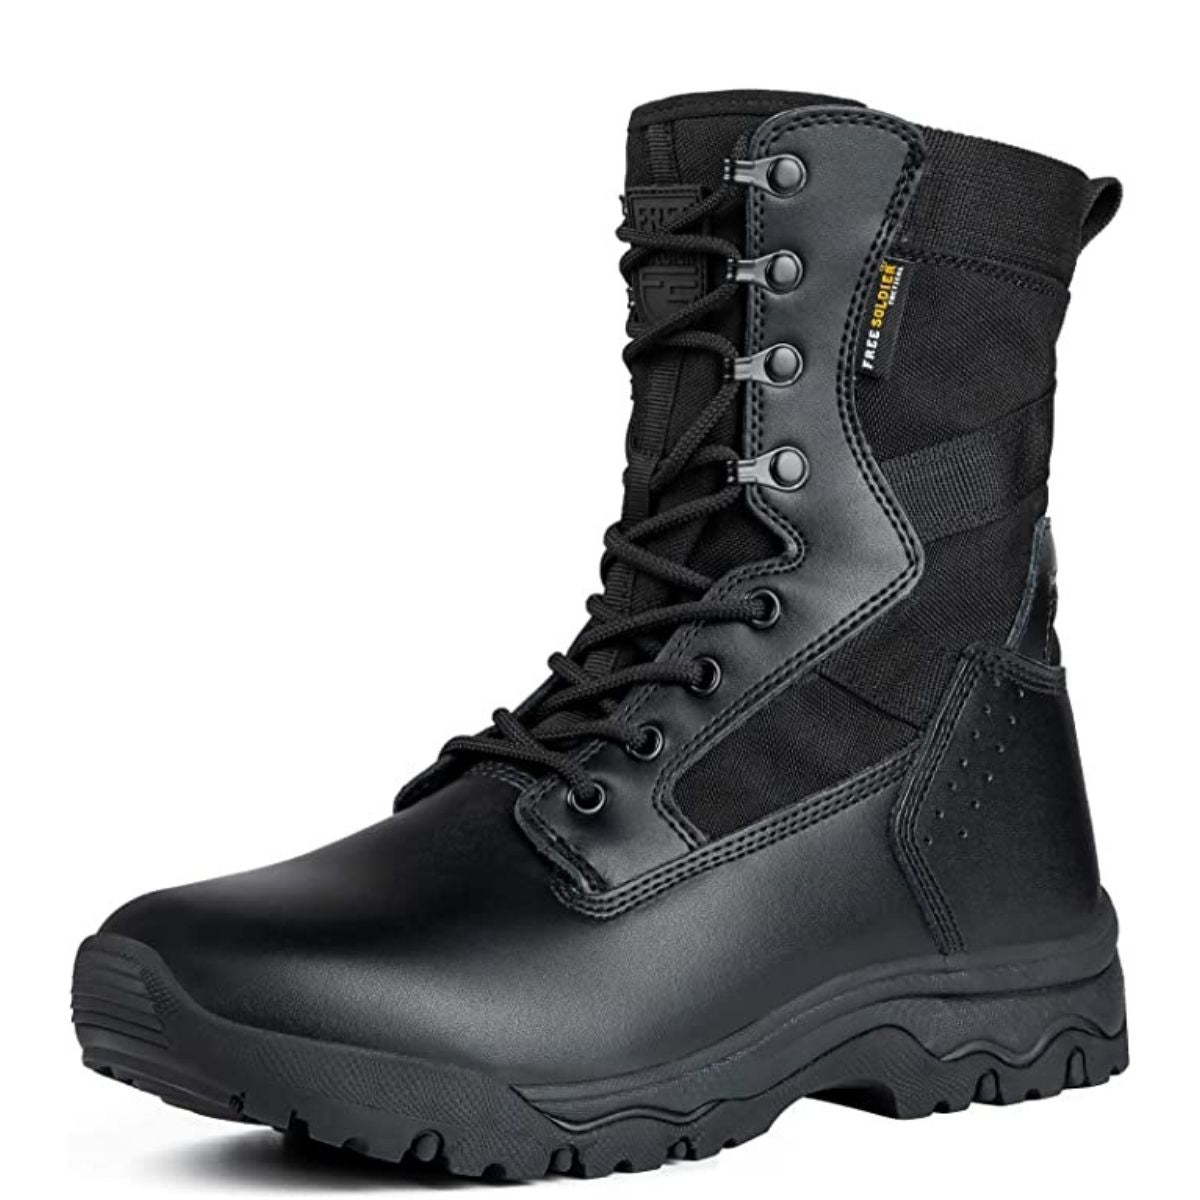 8-Inch Lightweight Thin Military Work Boots-Leather - FreeSoldier